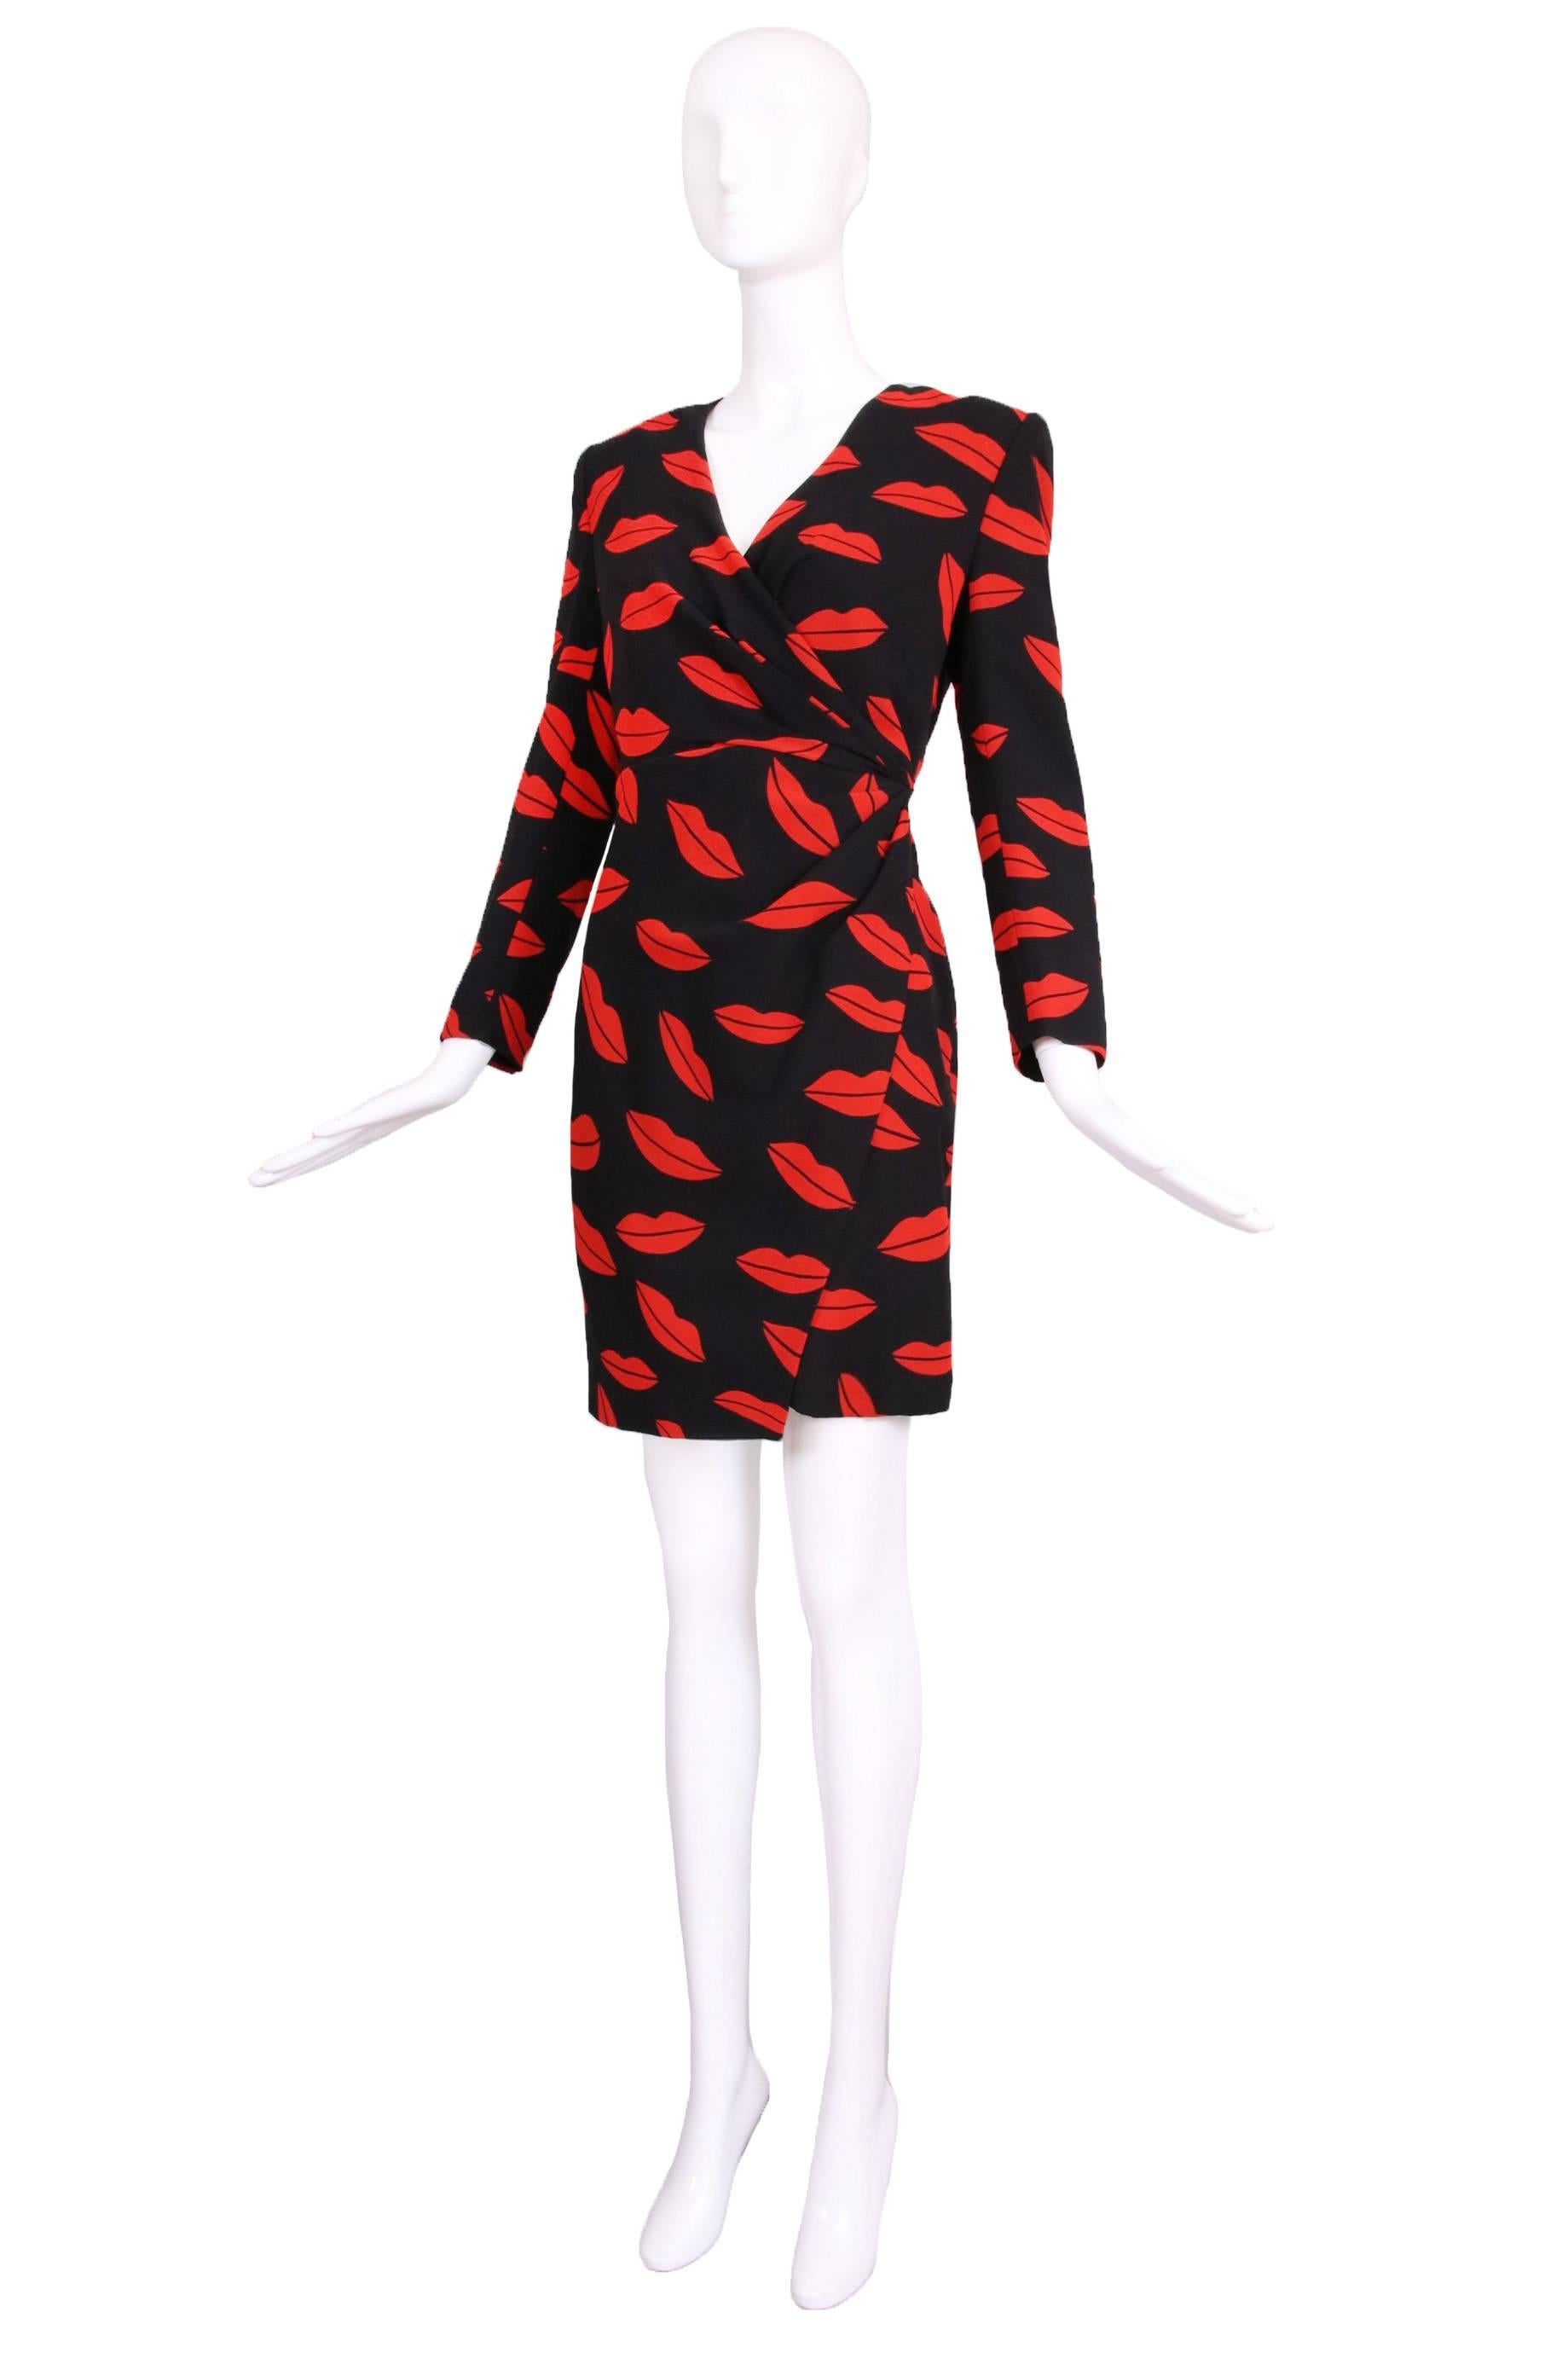 2013 Saint Laurent silk black with red lips print faux wrap dress. Dress is new with tags still attached. Size 40. In excellent condition with one near invisible pull at the left shoulder.
MEASUREMENTS:
Bust - 36